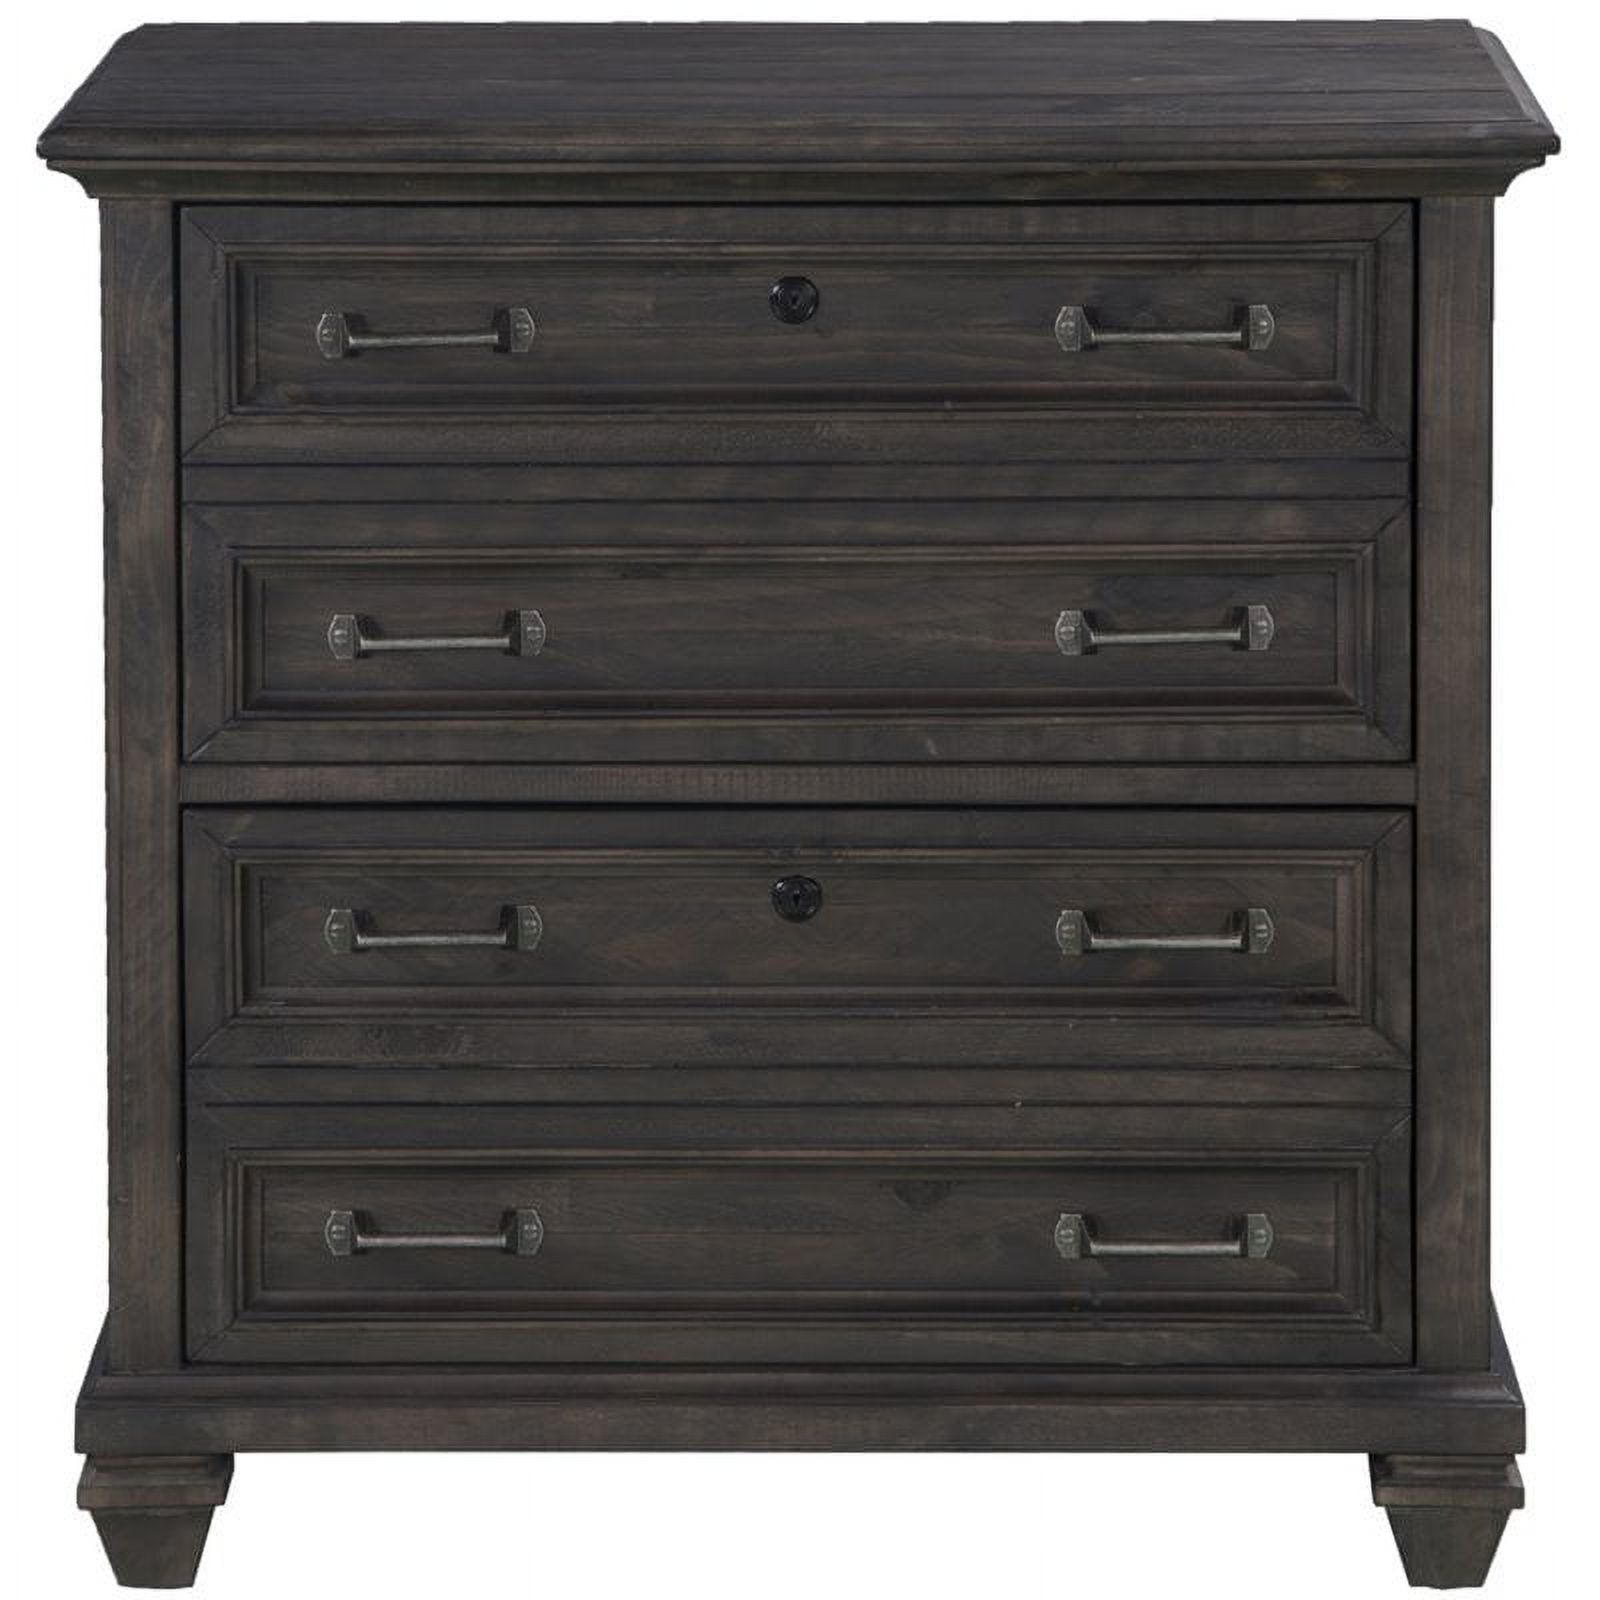 Beaumont Lane 4 Drawer Lateral File Cabinet in Weathered Charcoal - image 3 of 3